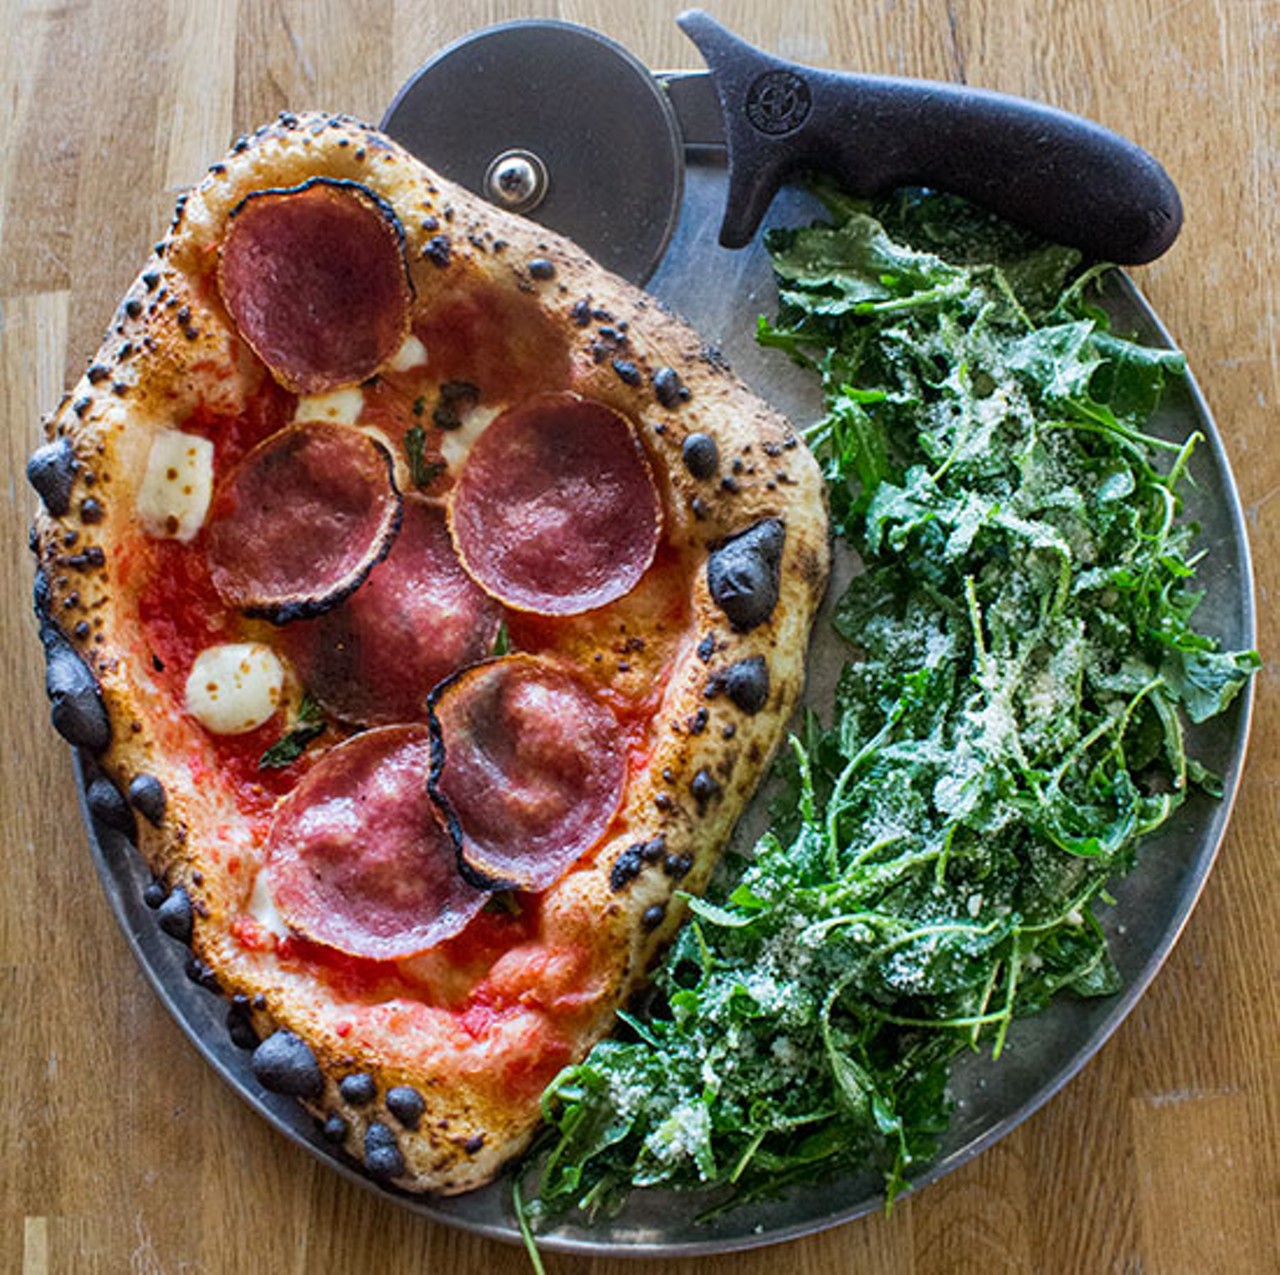 The Good Pie Now Serving its Neapolitan-Style Pizzas in the Delmar Loop